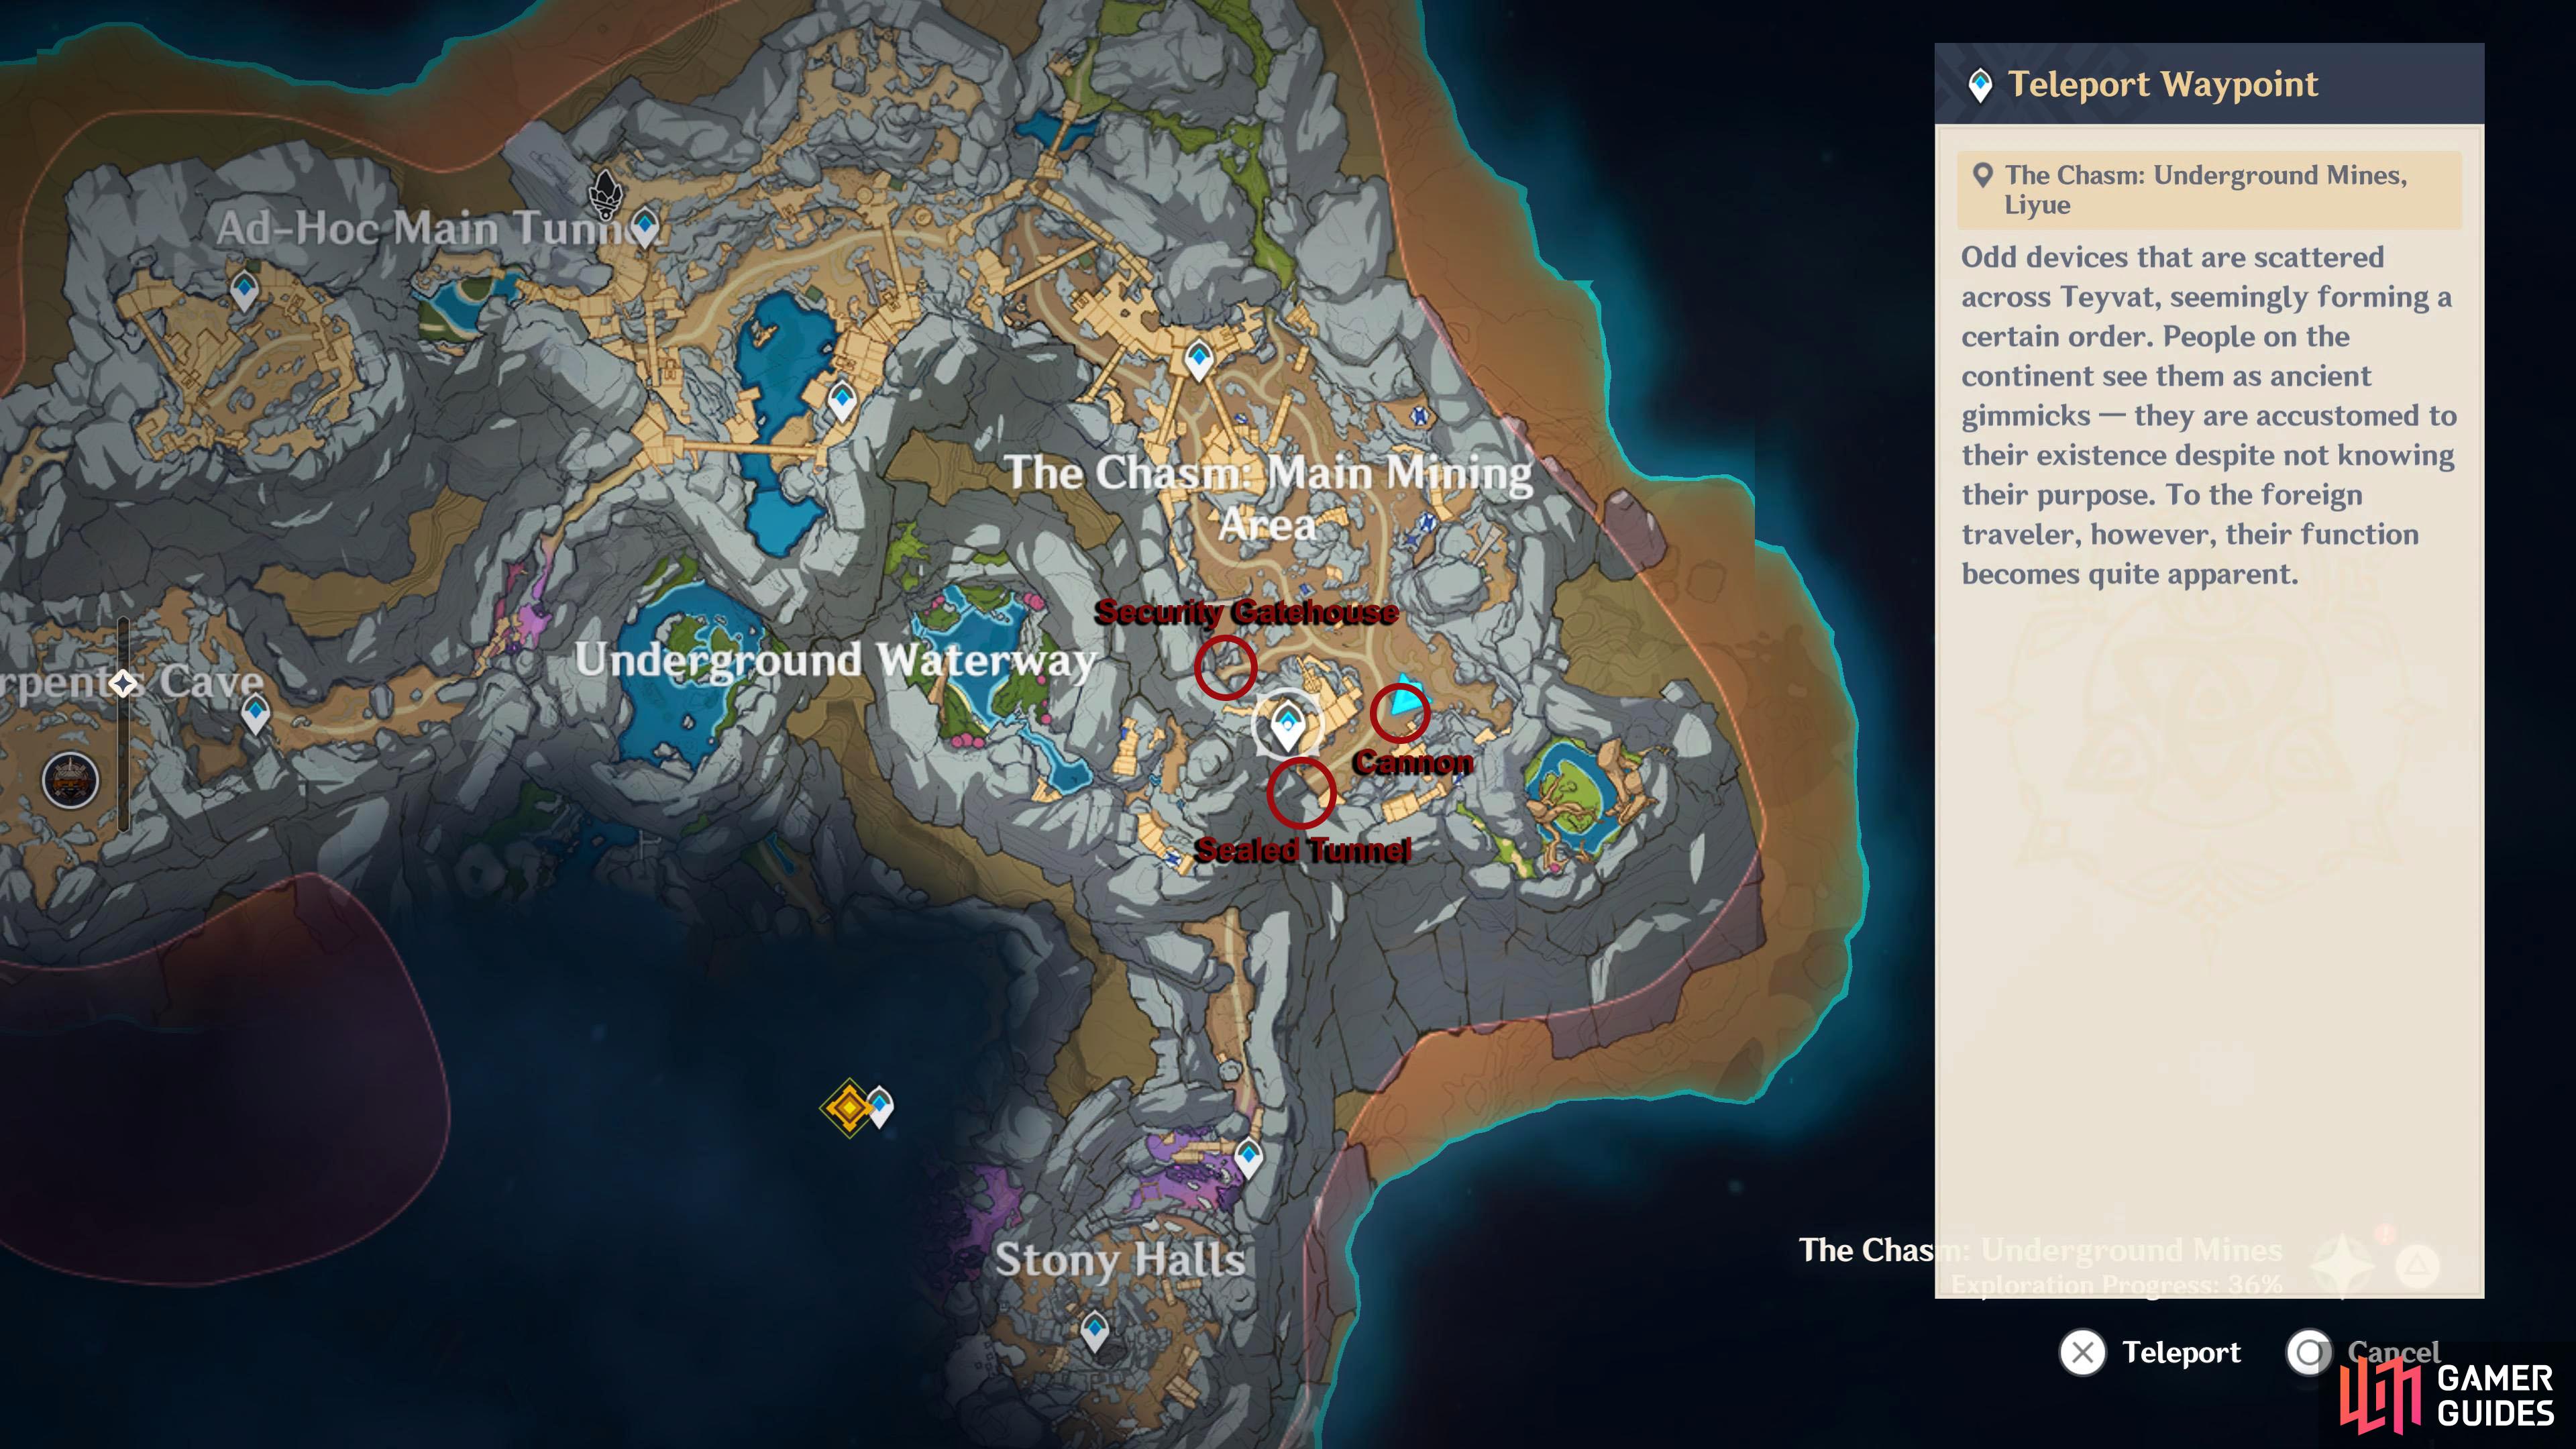 Here is an overview of all the important locations for this part of the quest.